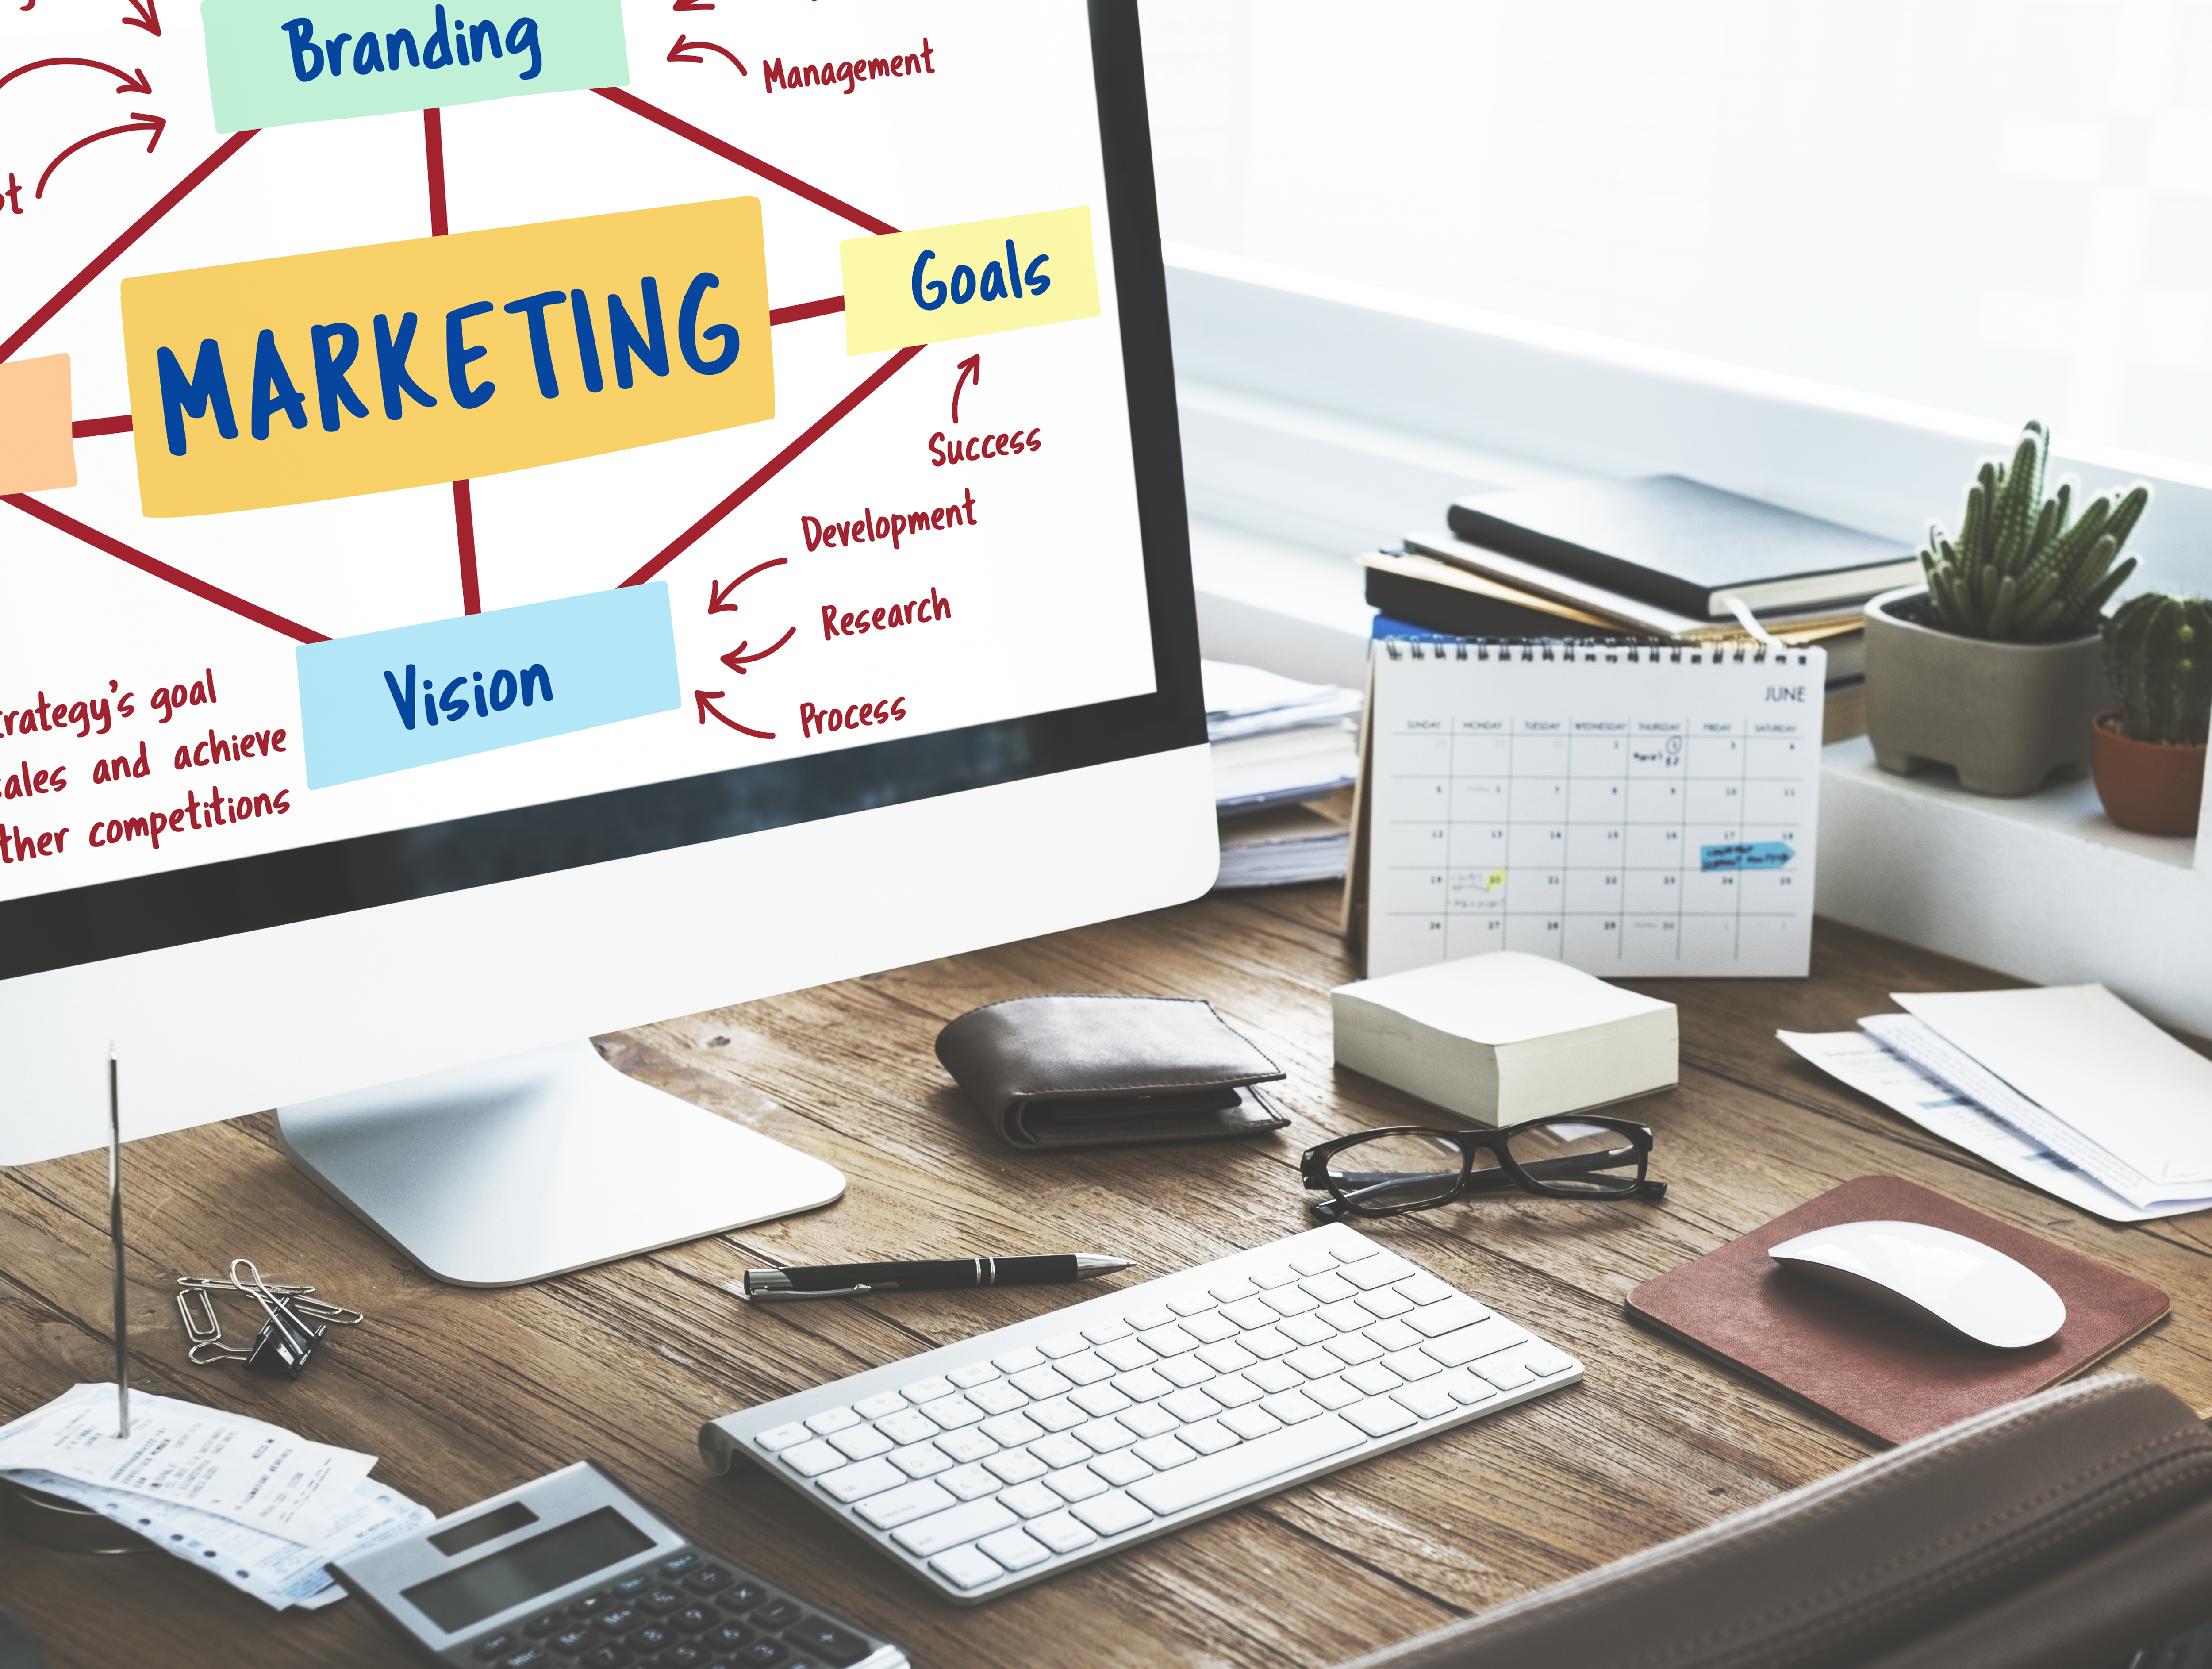 9 skills you need to possess to become a great Marketing Specialist